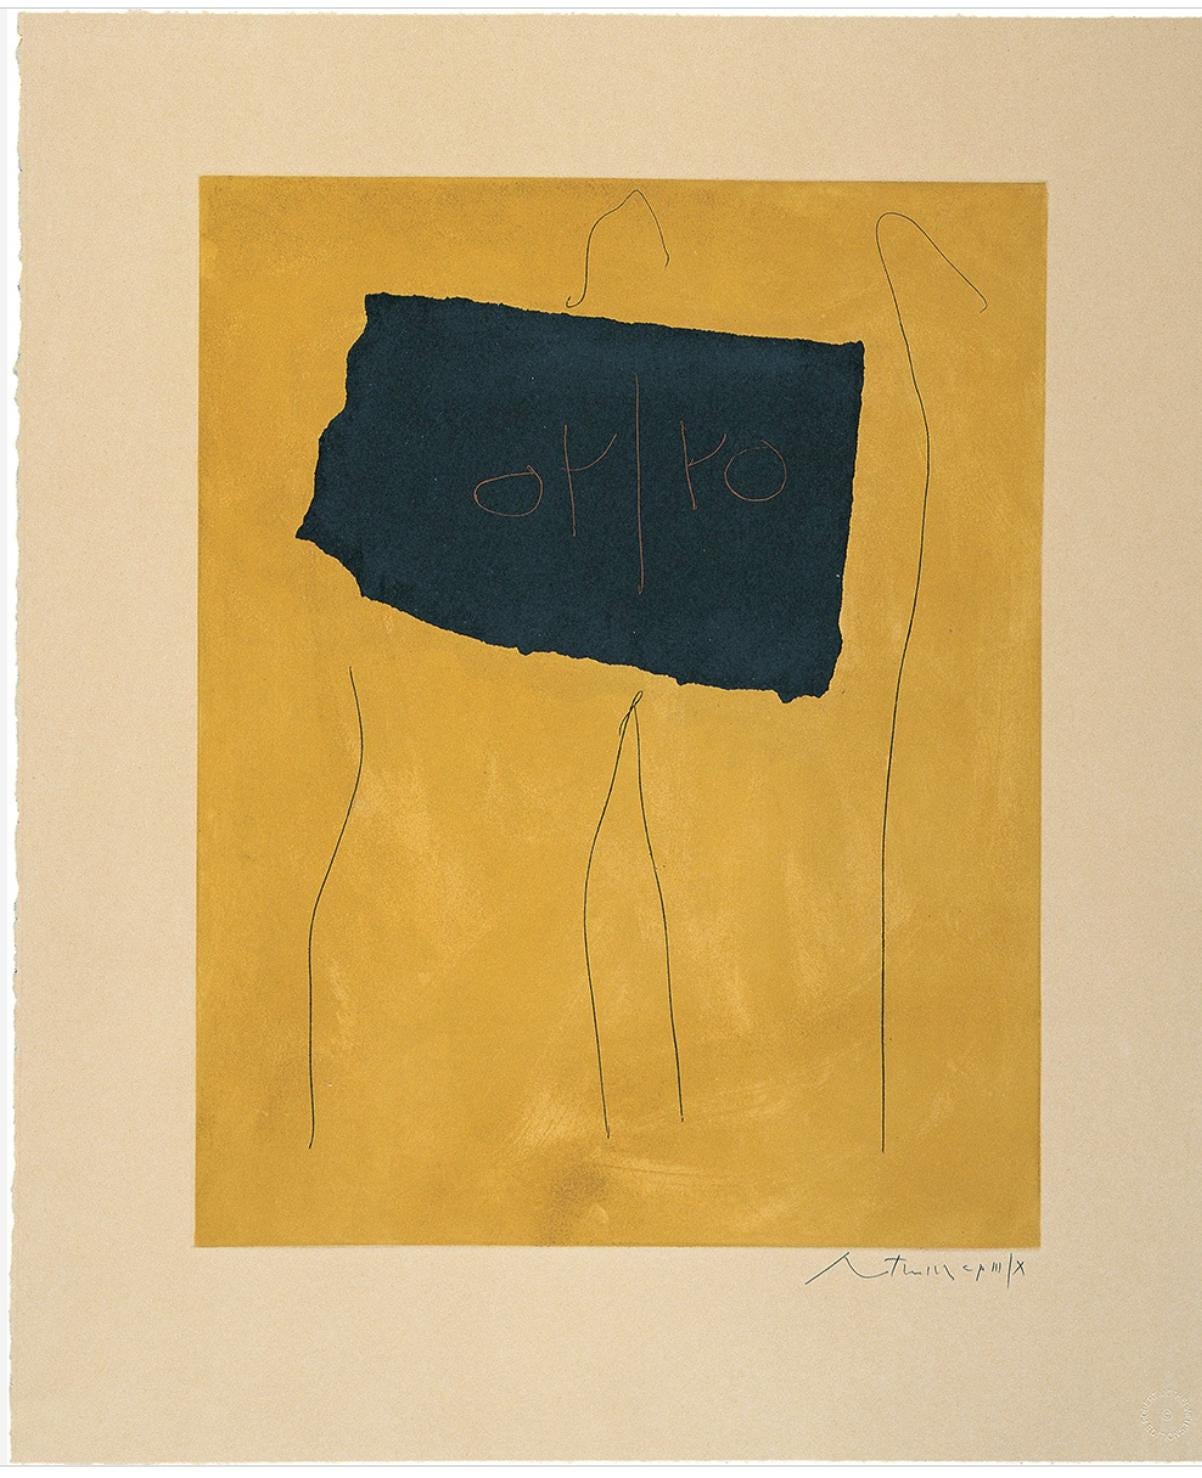 Robert Motherwell (American, 1915-1991)
Oy / Yo, 1978
Aquatint, soft ground etching in colors with collage on Buff Rives BFK paper and black Ingres paper
Edition 65/78 (In addition to 10 Artist's Proofs)
Pencil signed and numbered lower right
With